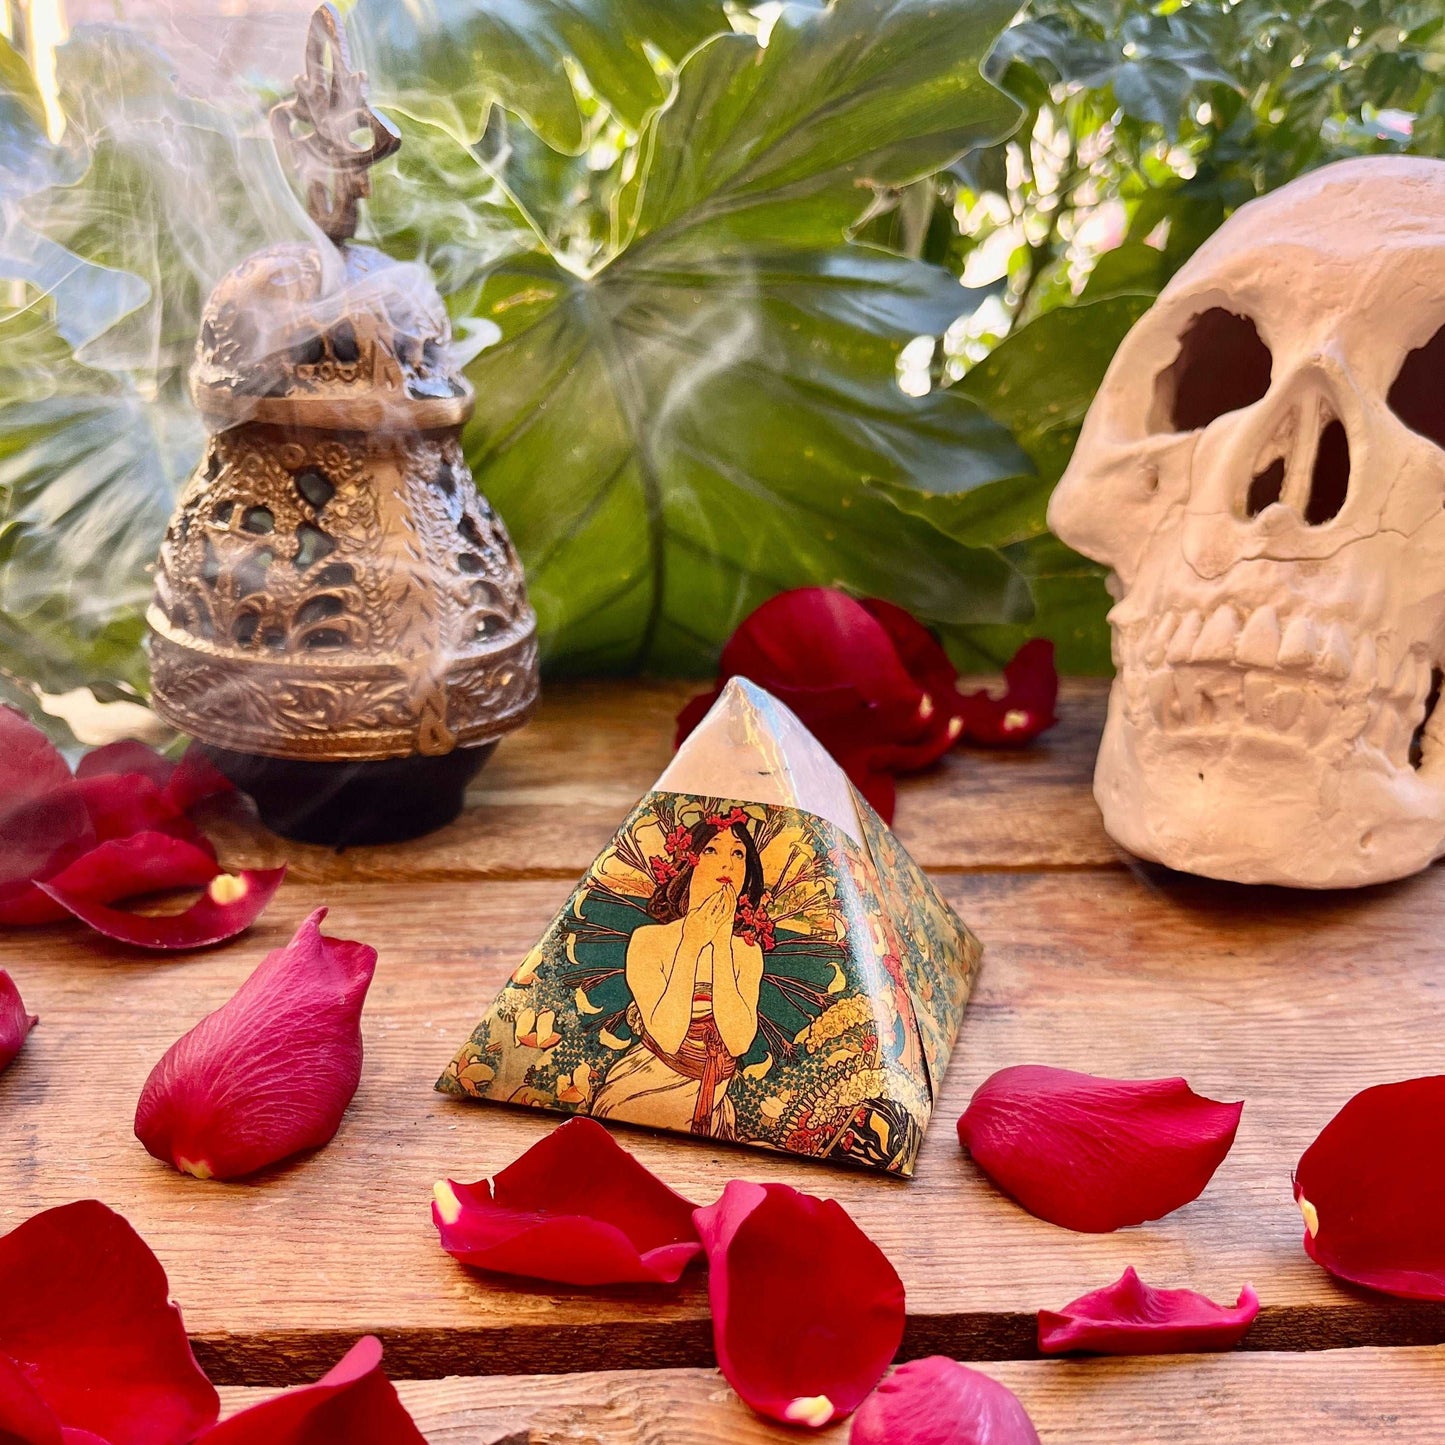 Experience emotional support with our Honoring Grief Bath Bomb, crafted with Orange, Cedar, and Patchouli essential oils. Nourish your senses and find solace as the comforting aroma honors your emotions.